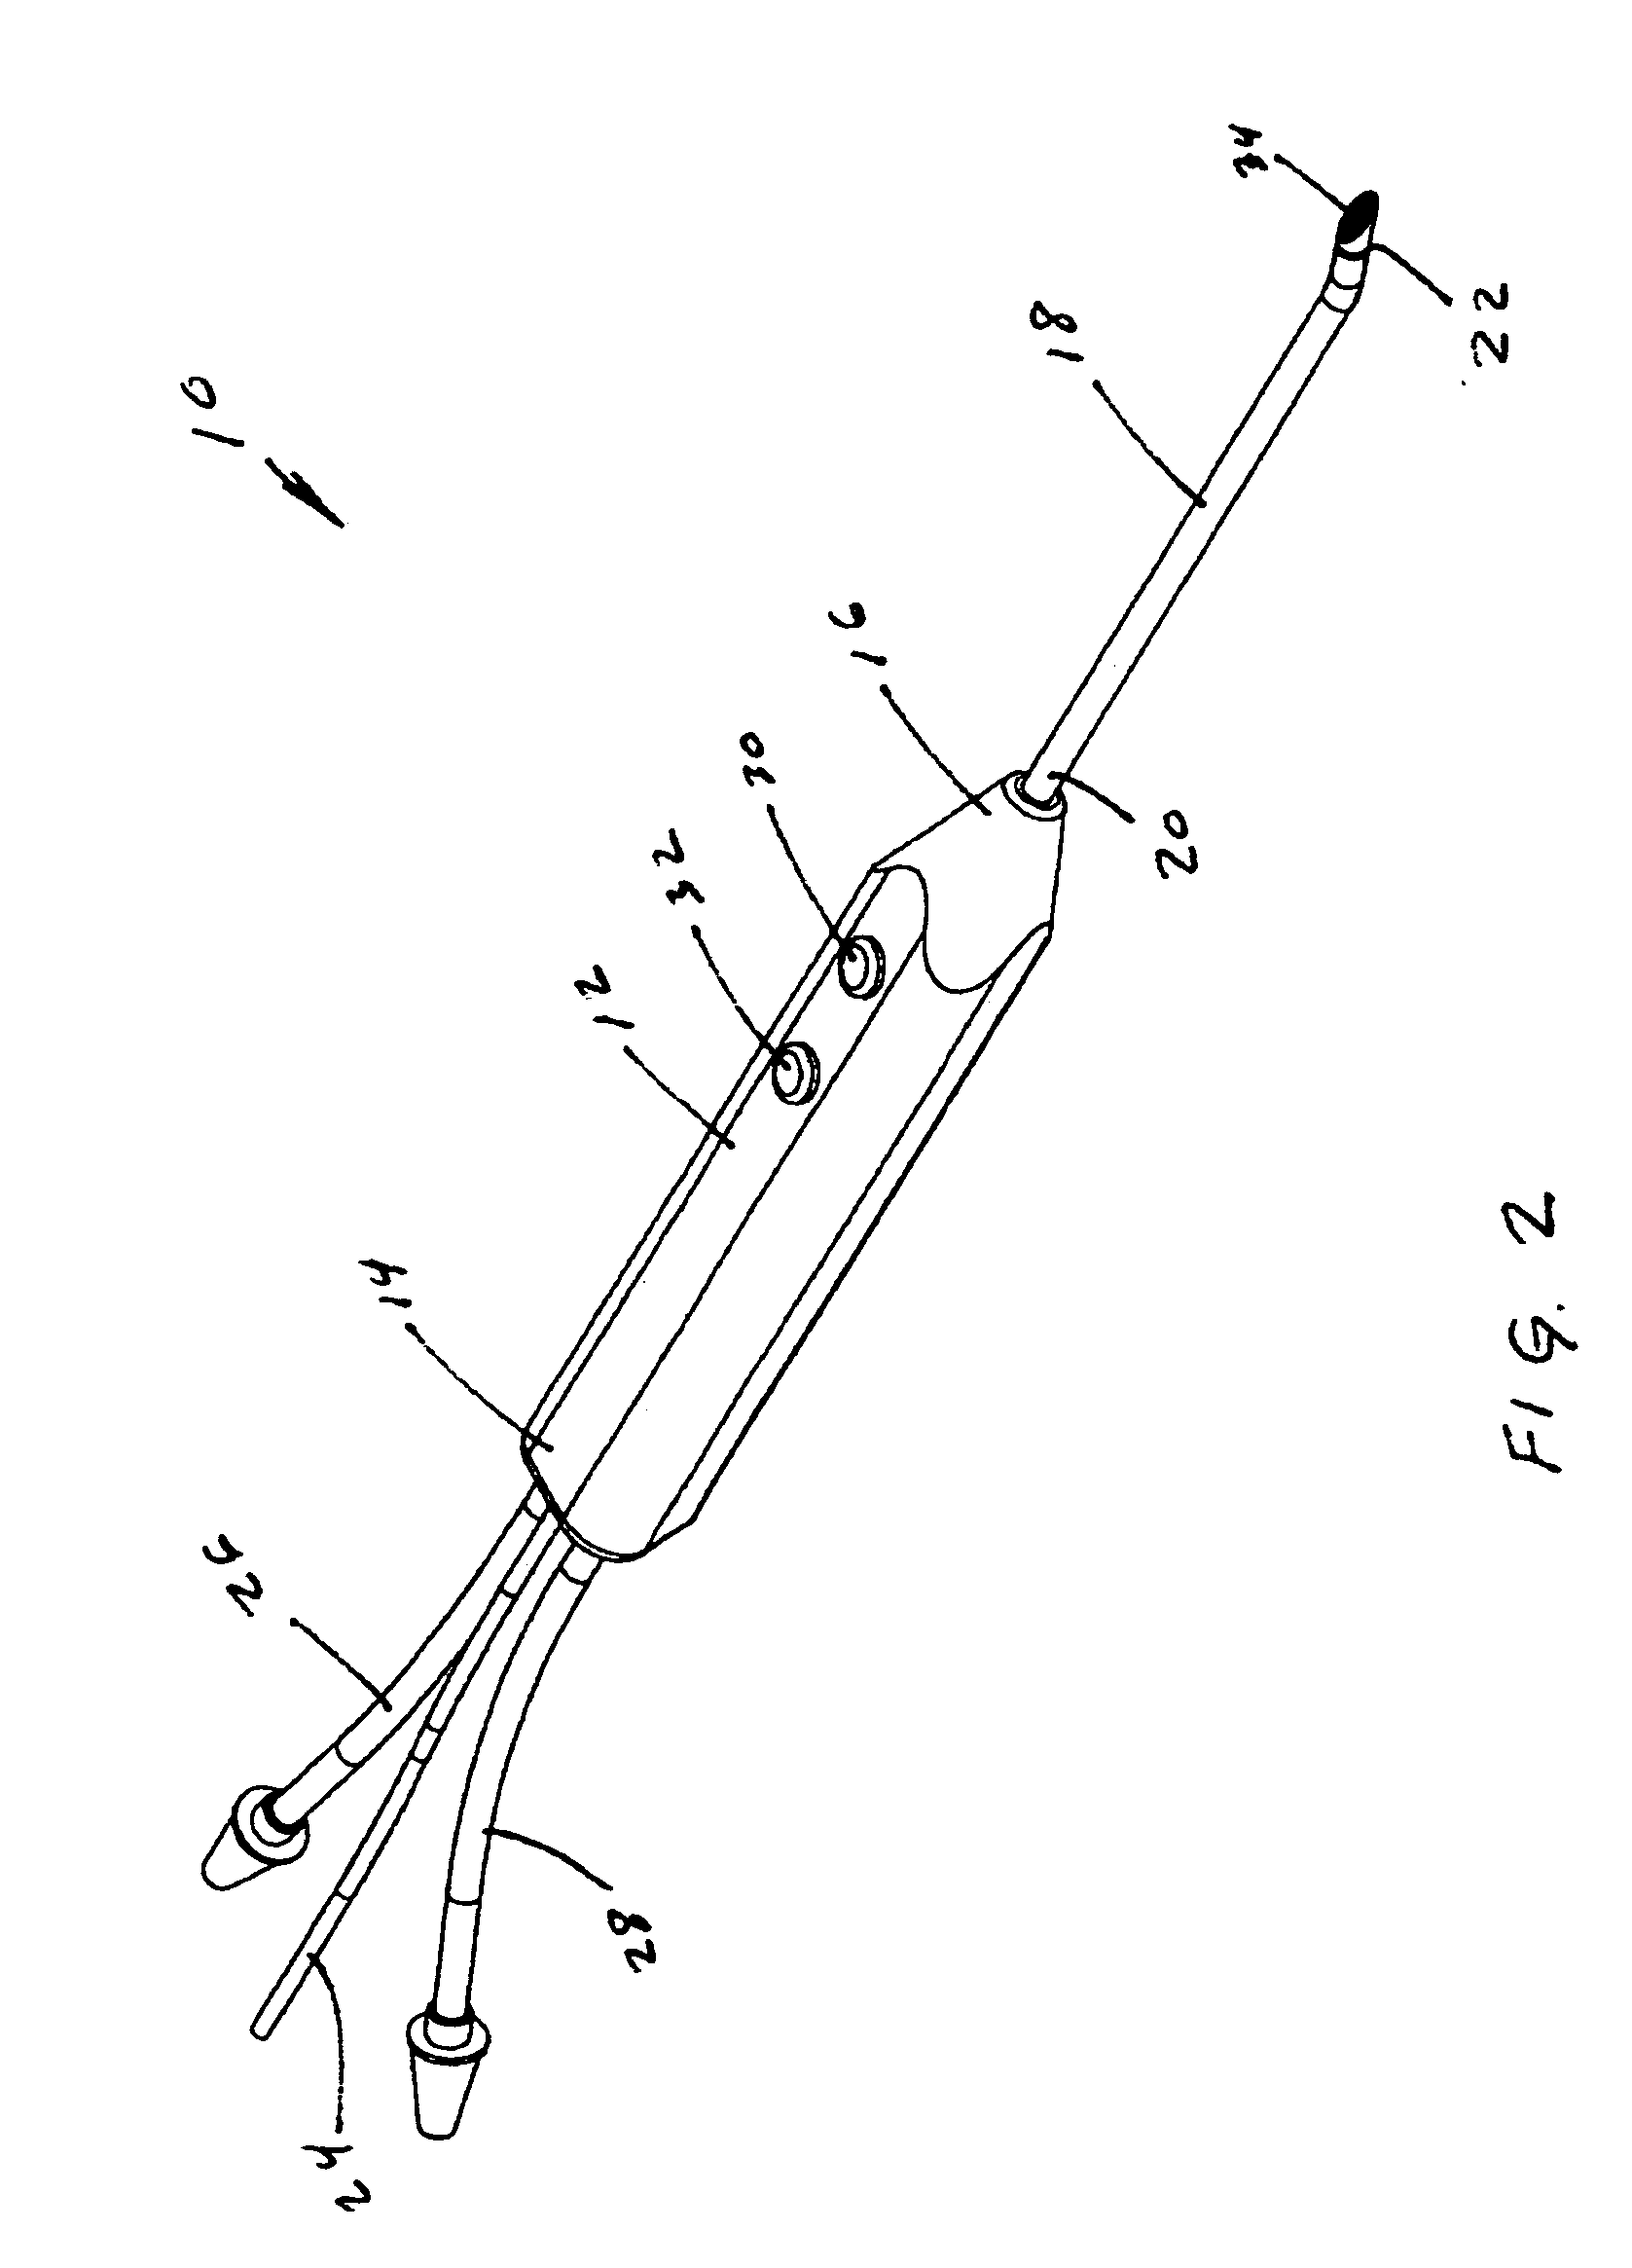 Electrosurgical device with floating-potential electrode and methods of using same